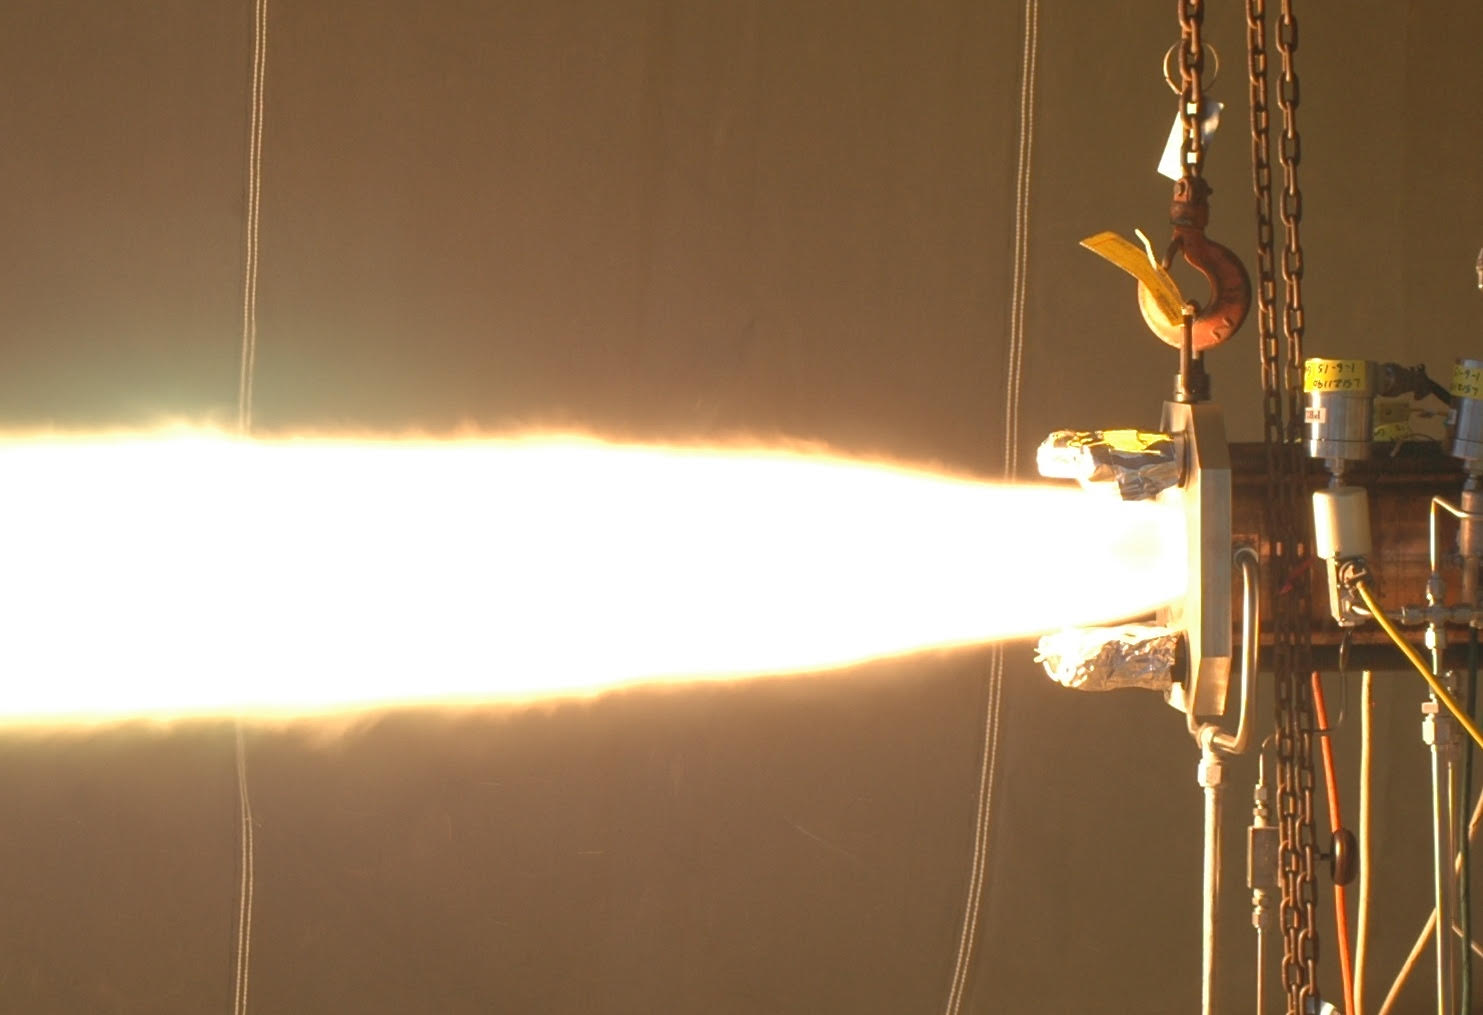 Aerojet Rocketdyne recently completed hot-fire testing of a single-element main injector for the AR1 rocket engine that was completely built using Additive Manufacturing. Photo Credit Aerojet Rocketdyne